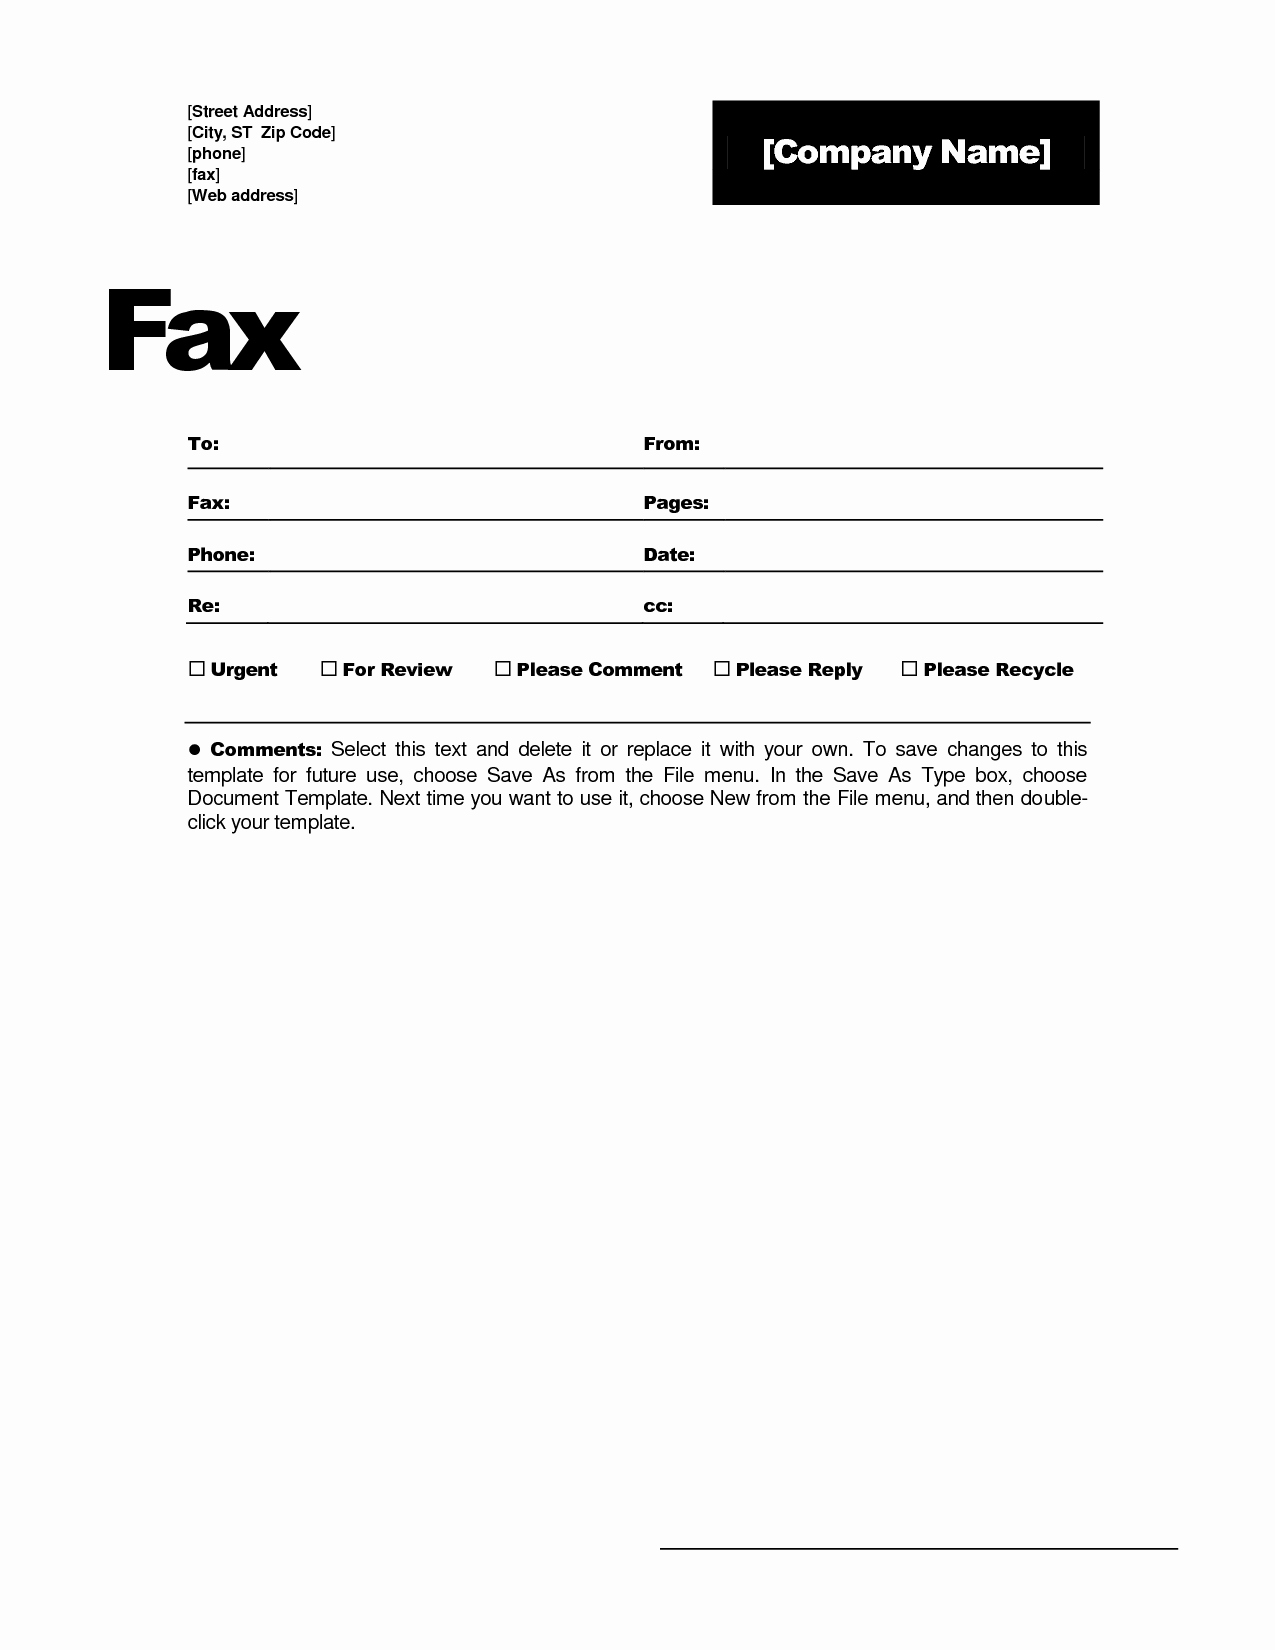 Fax Cover Sheet Template Word Lovely Fax Cover Sheet Template In Word – Moms In Hawaii